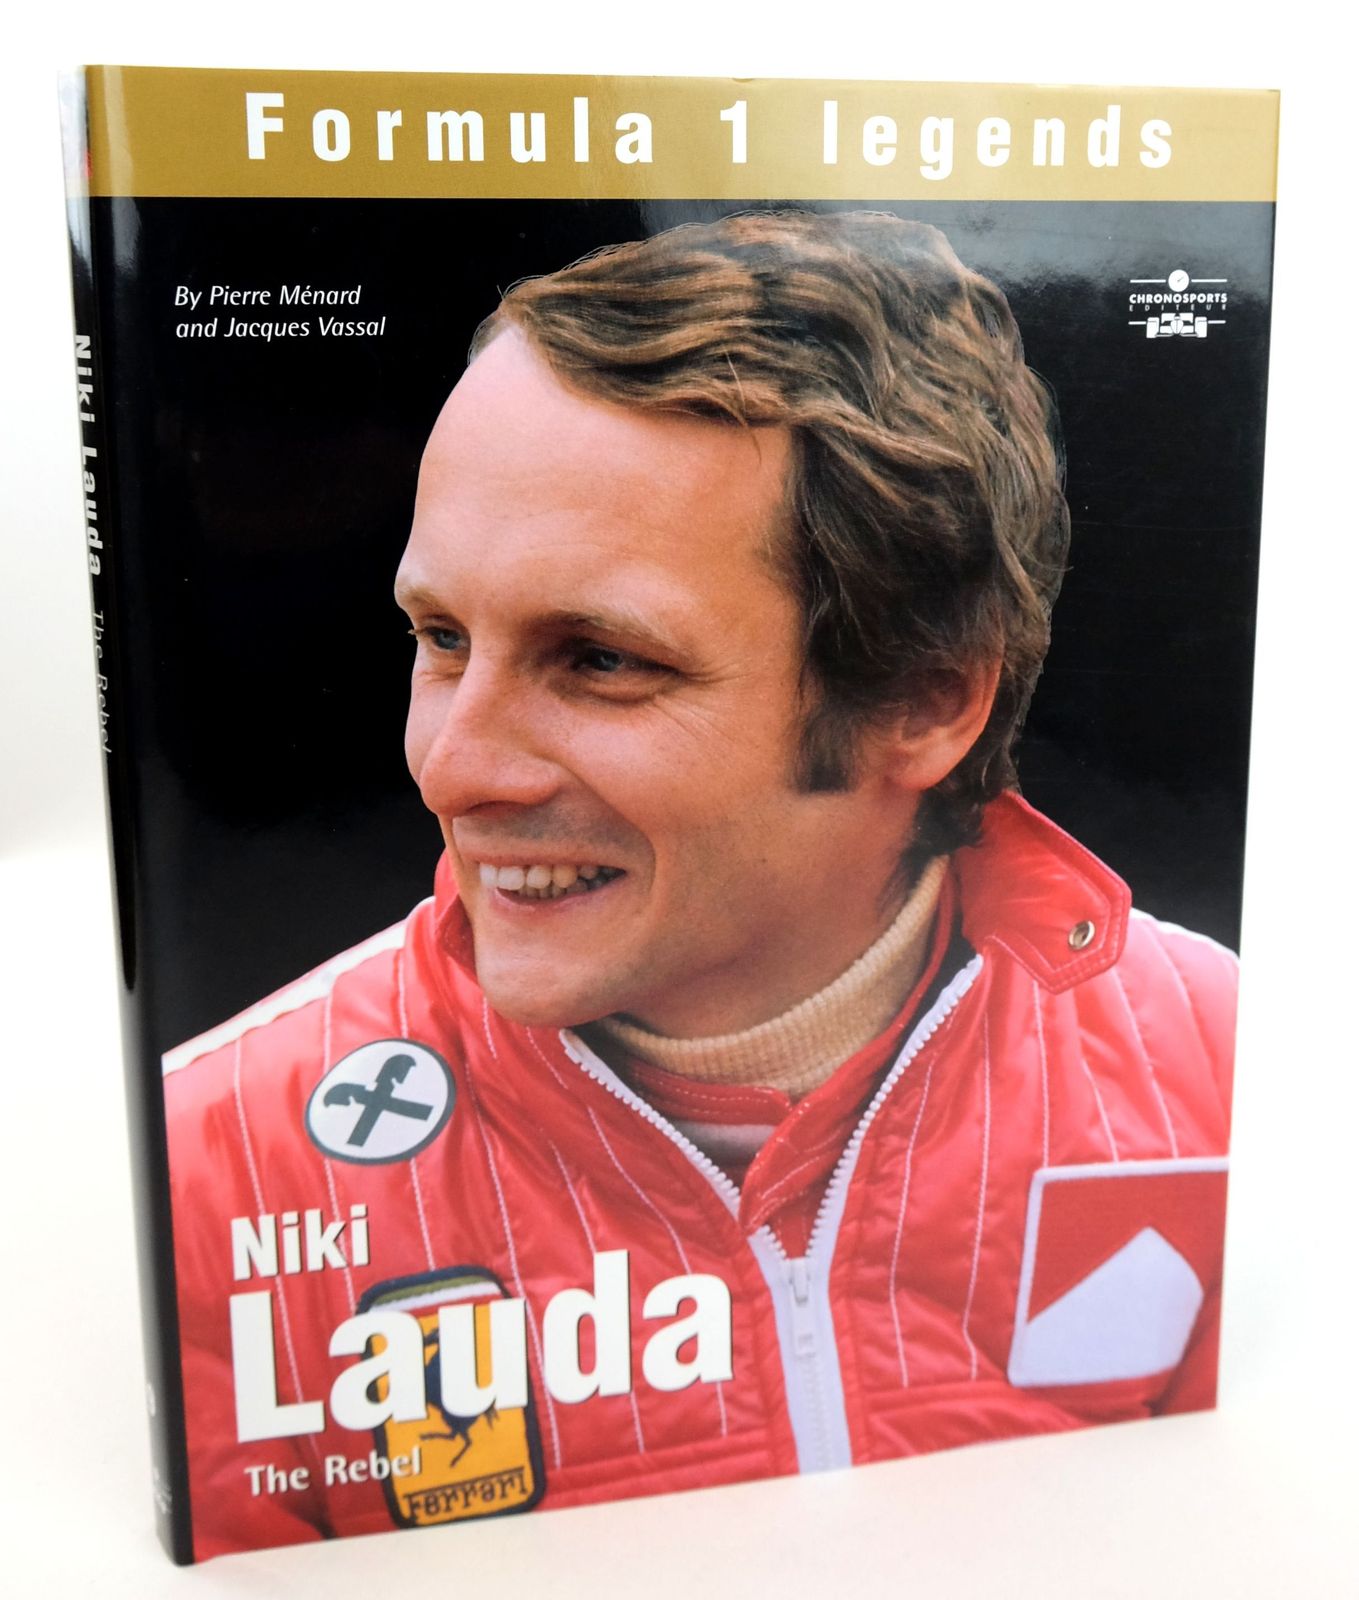 Photo of NIKI LAUDA: THE REBEL written by Menard, Pierre Vassal, Jacques published by Chronosports (STOCK CODE: 1819158)  for sale by Stella & Rose's Books